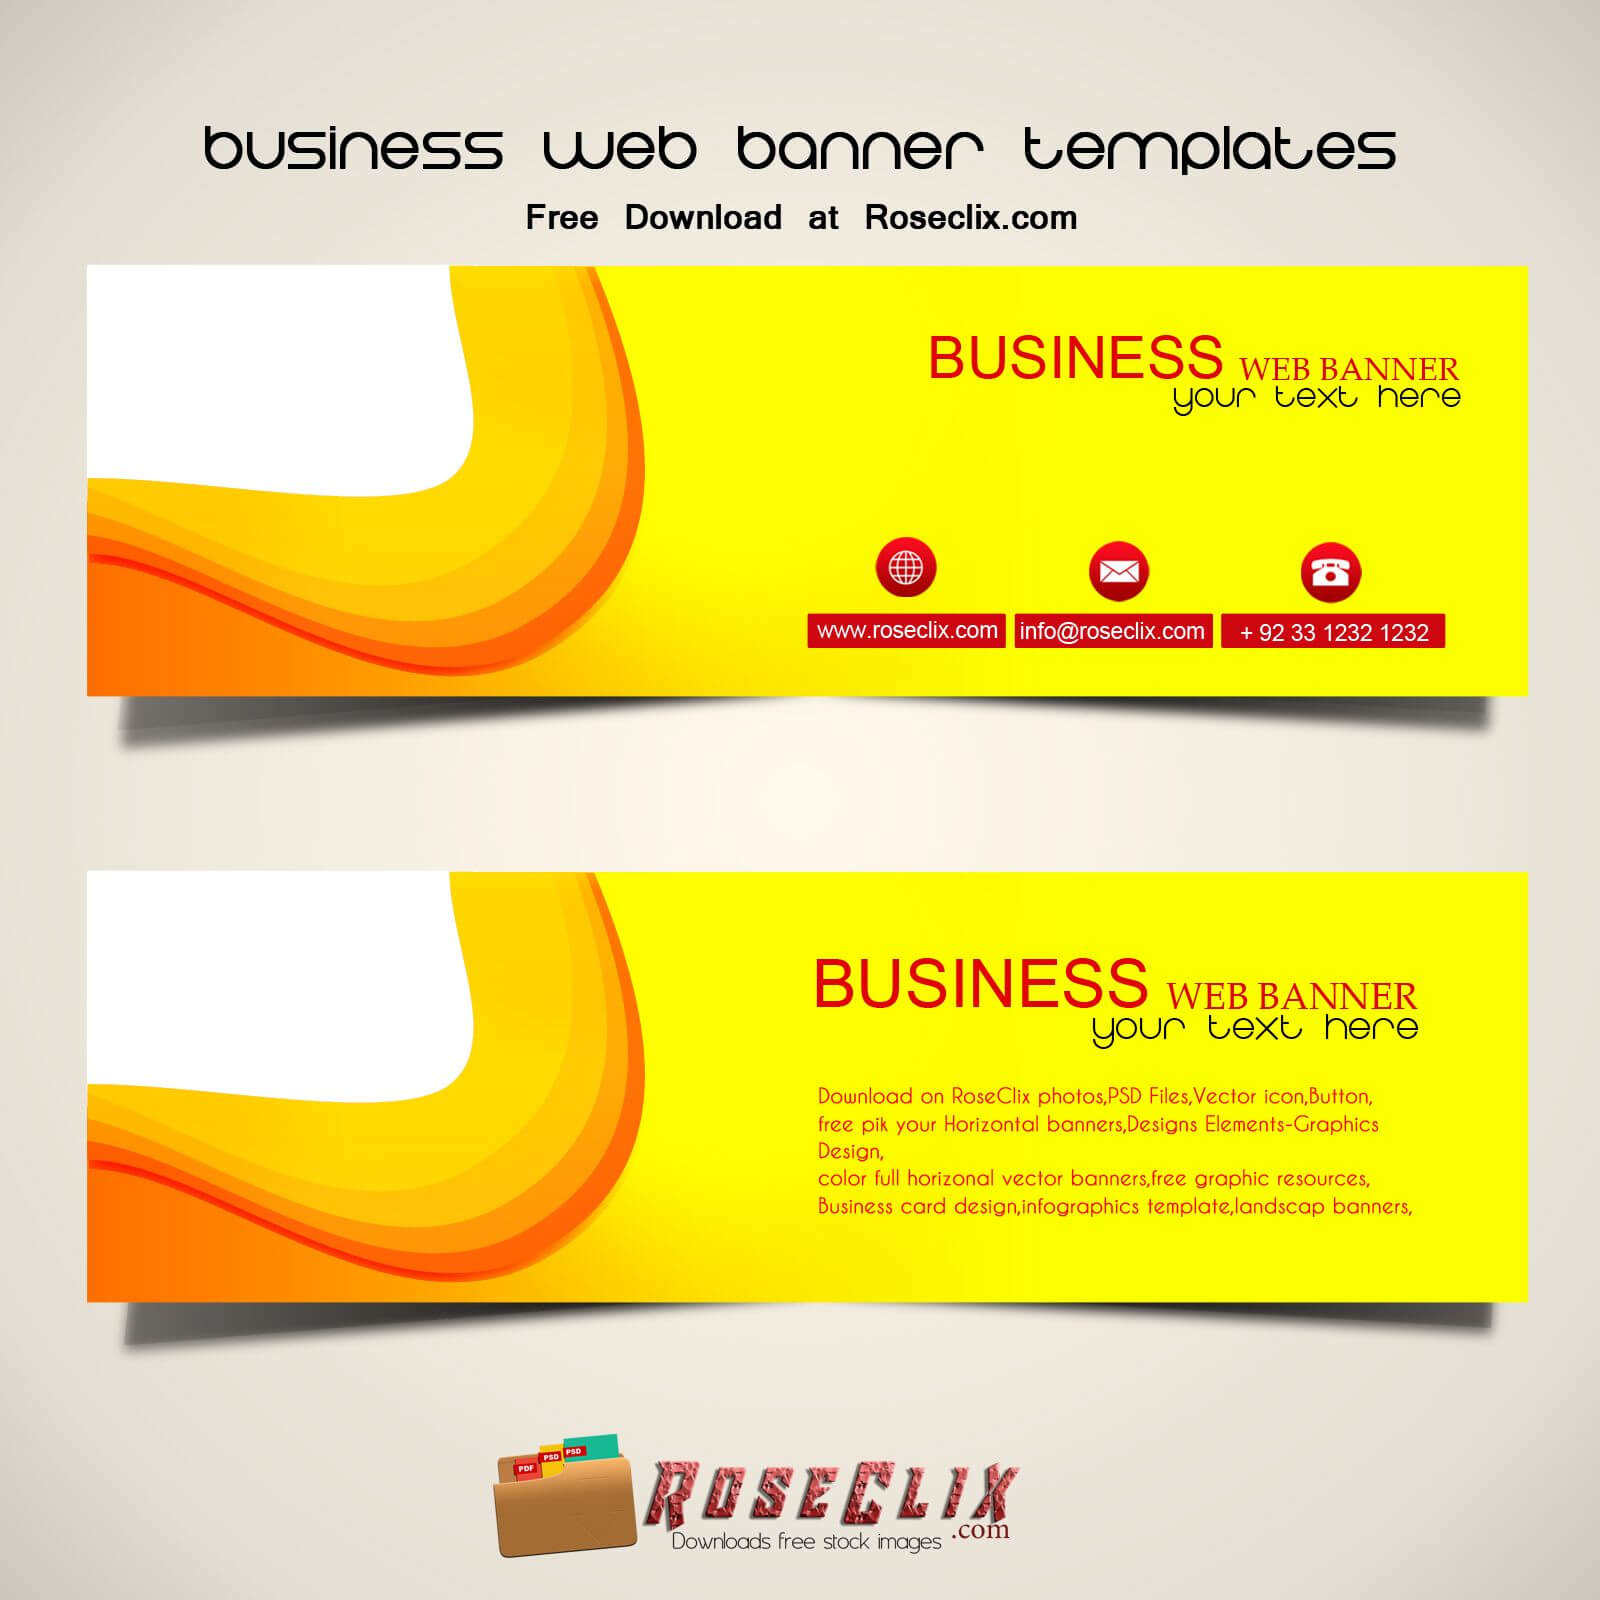 Pinroseclix On Free Web Banner Templates | Free Regarding Website Banner Templates Free Download